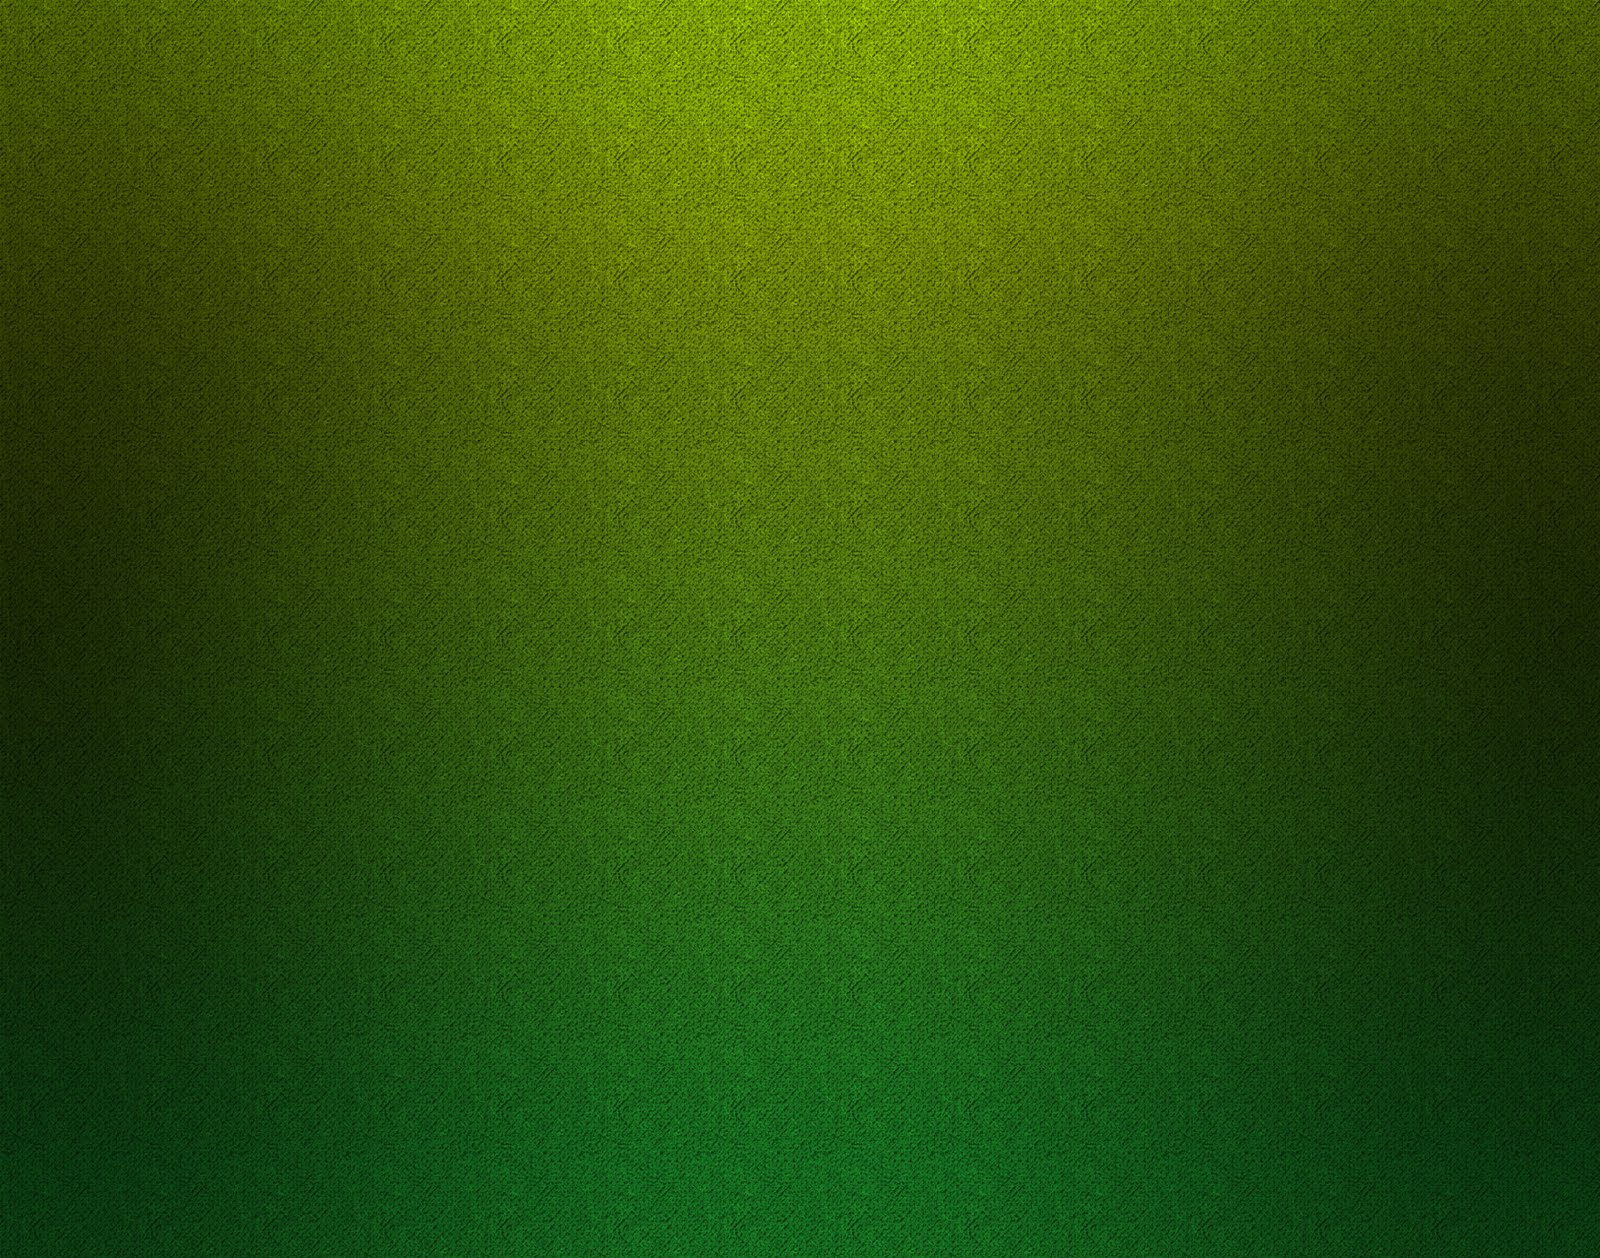 Green Textures Background For Powerpoint Abstract And